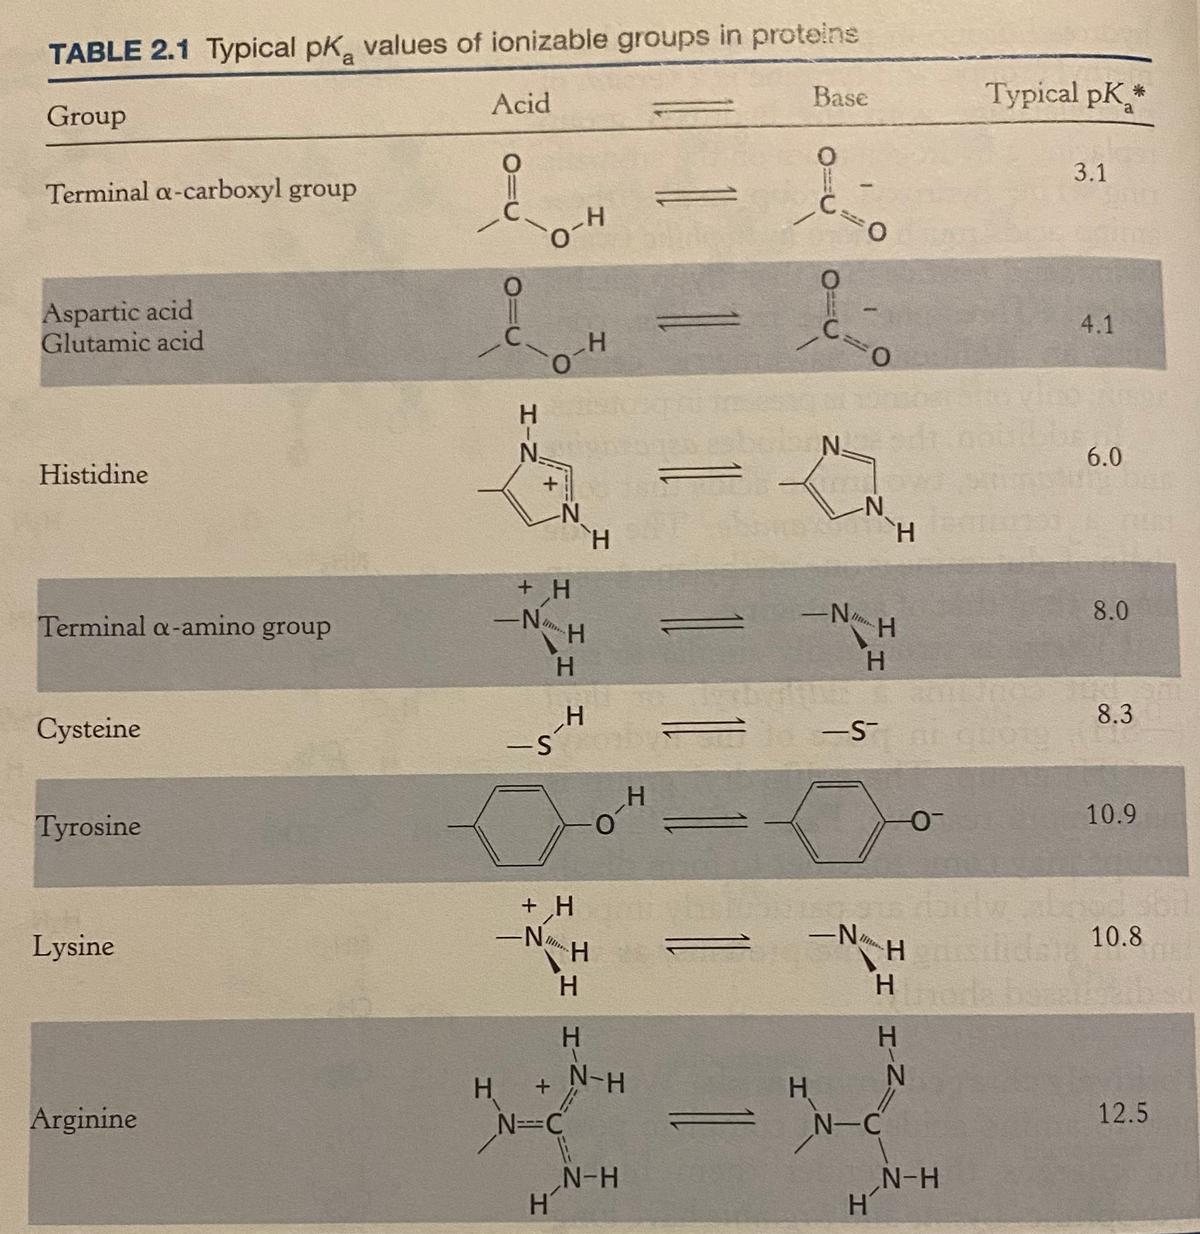 TABLE 2.1 Typical pK values of ionizable groups in proteins
Group
Terminal a-carboxyl group
Aspartic acid
Glutamic acid
Histidine
Terminal a-amino group
Cysteine
Tyrosine
Lysine
Arginine
Acid
H-N
H
N.
-N
O-H
O
+
+ H
-N
-S
-N
D...
H
H
+ H
H
H
Ilm.
N=C
H
H
H
H
H
+ N-H
O
N-H
H
Base
O
H
C=O
O
1
<=0
N.
-N
-NH
H
-S
H
N-C
H
-O
sors doidw
-N
-Homicilidsta
H
Typical pK *
N-H
3.1
4.1
6.0
8.0
8.3
10.9
10.8
12.5